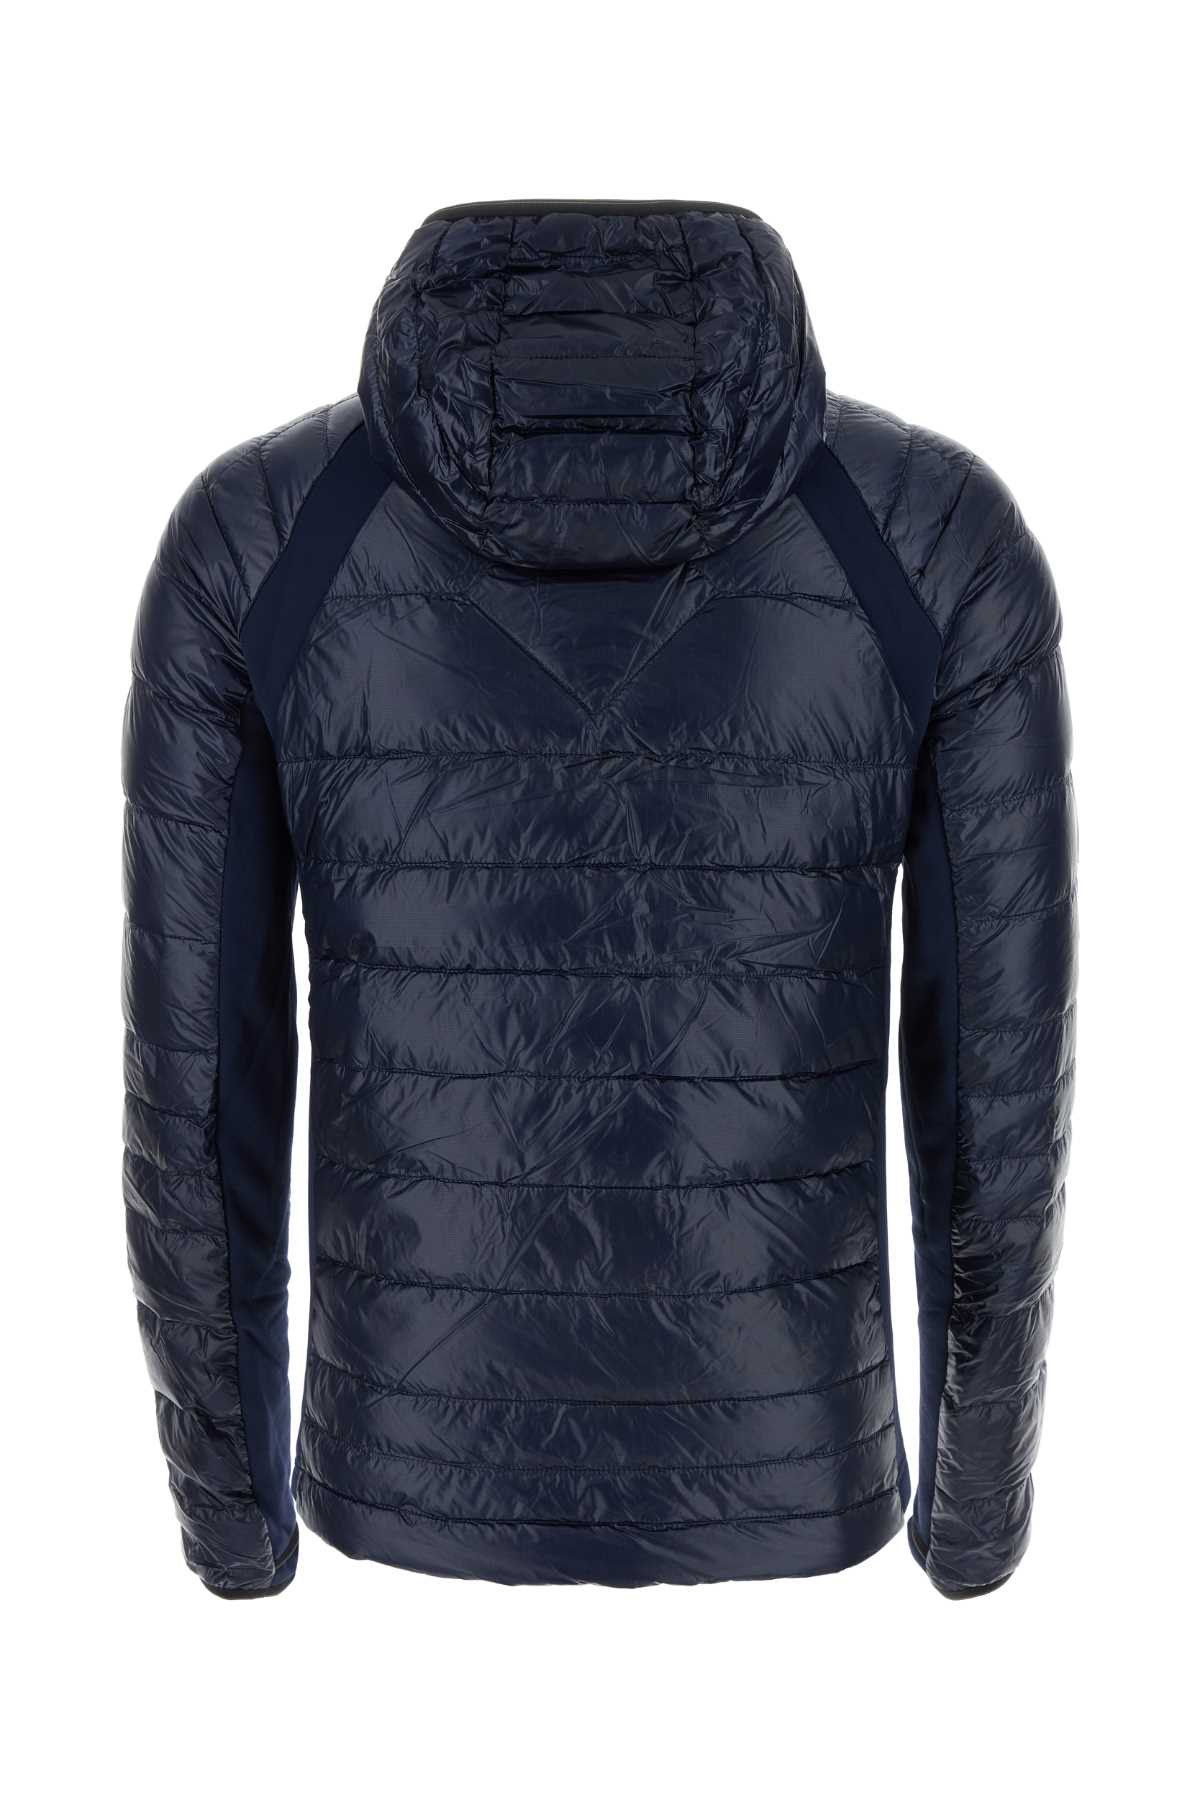 Canada Goose Midnight Blue Wool And Nylon Hybridge Down Jacket In 63